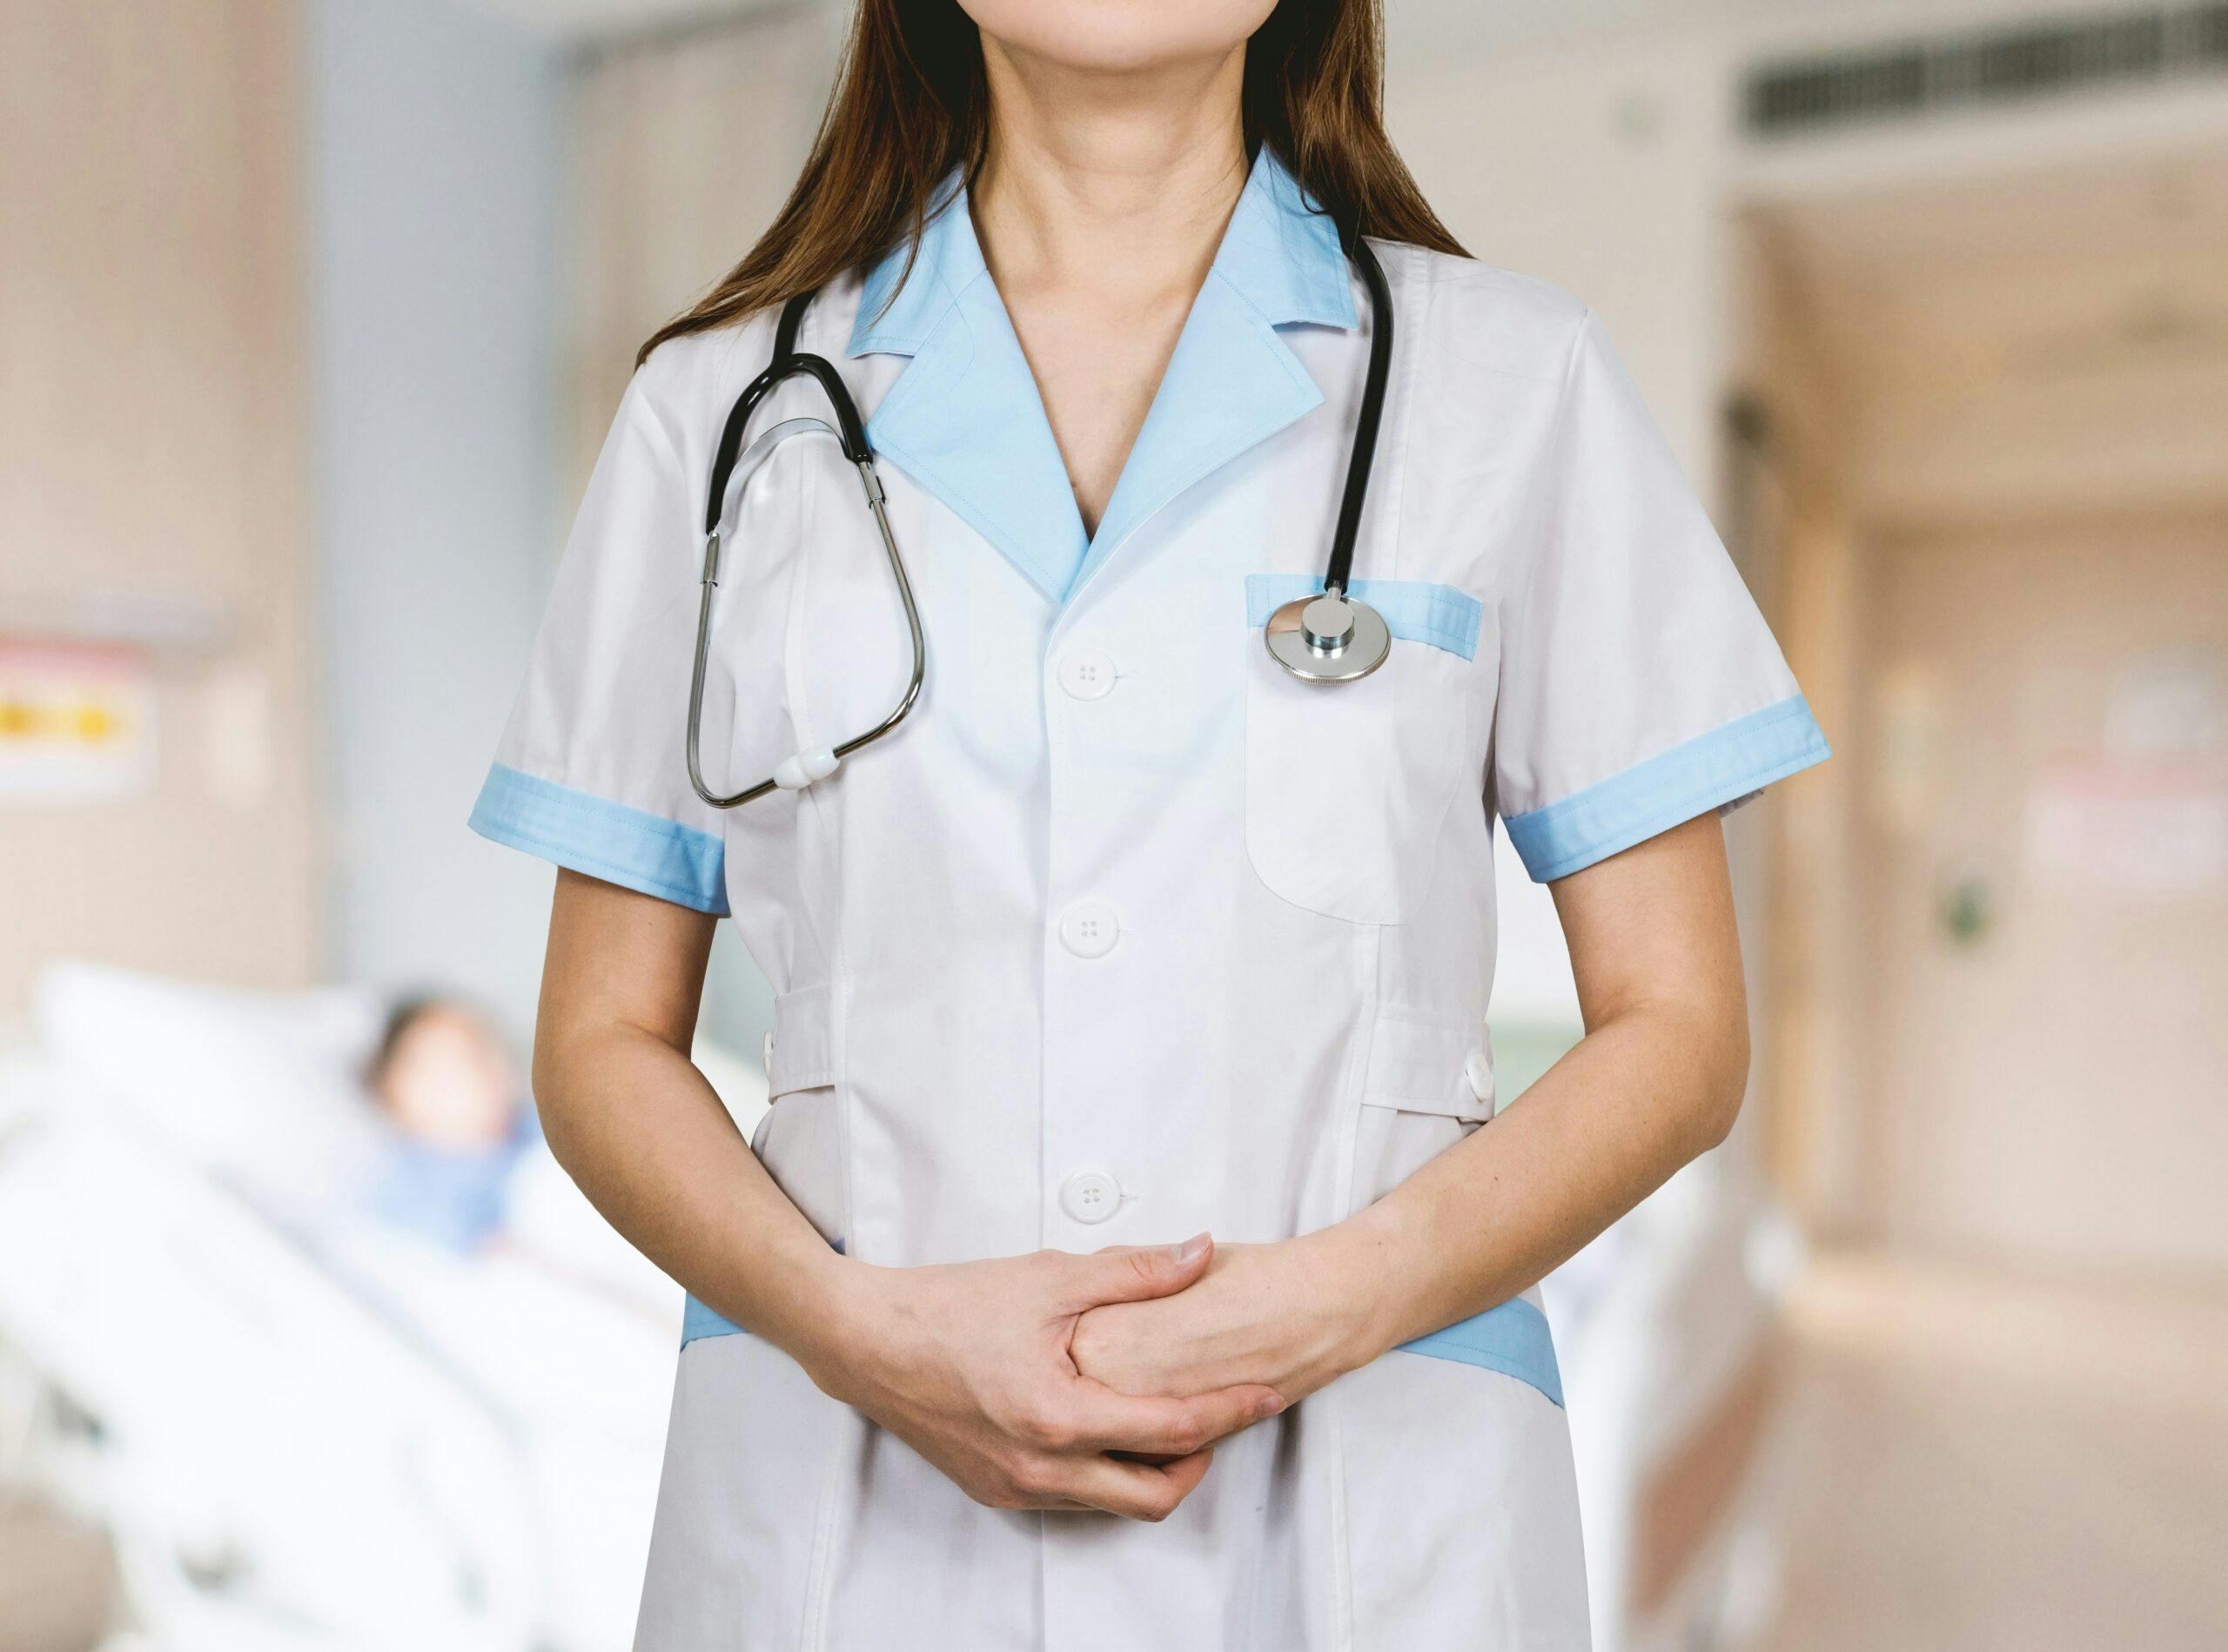 A nurse with her hands clasped in front of her.